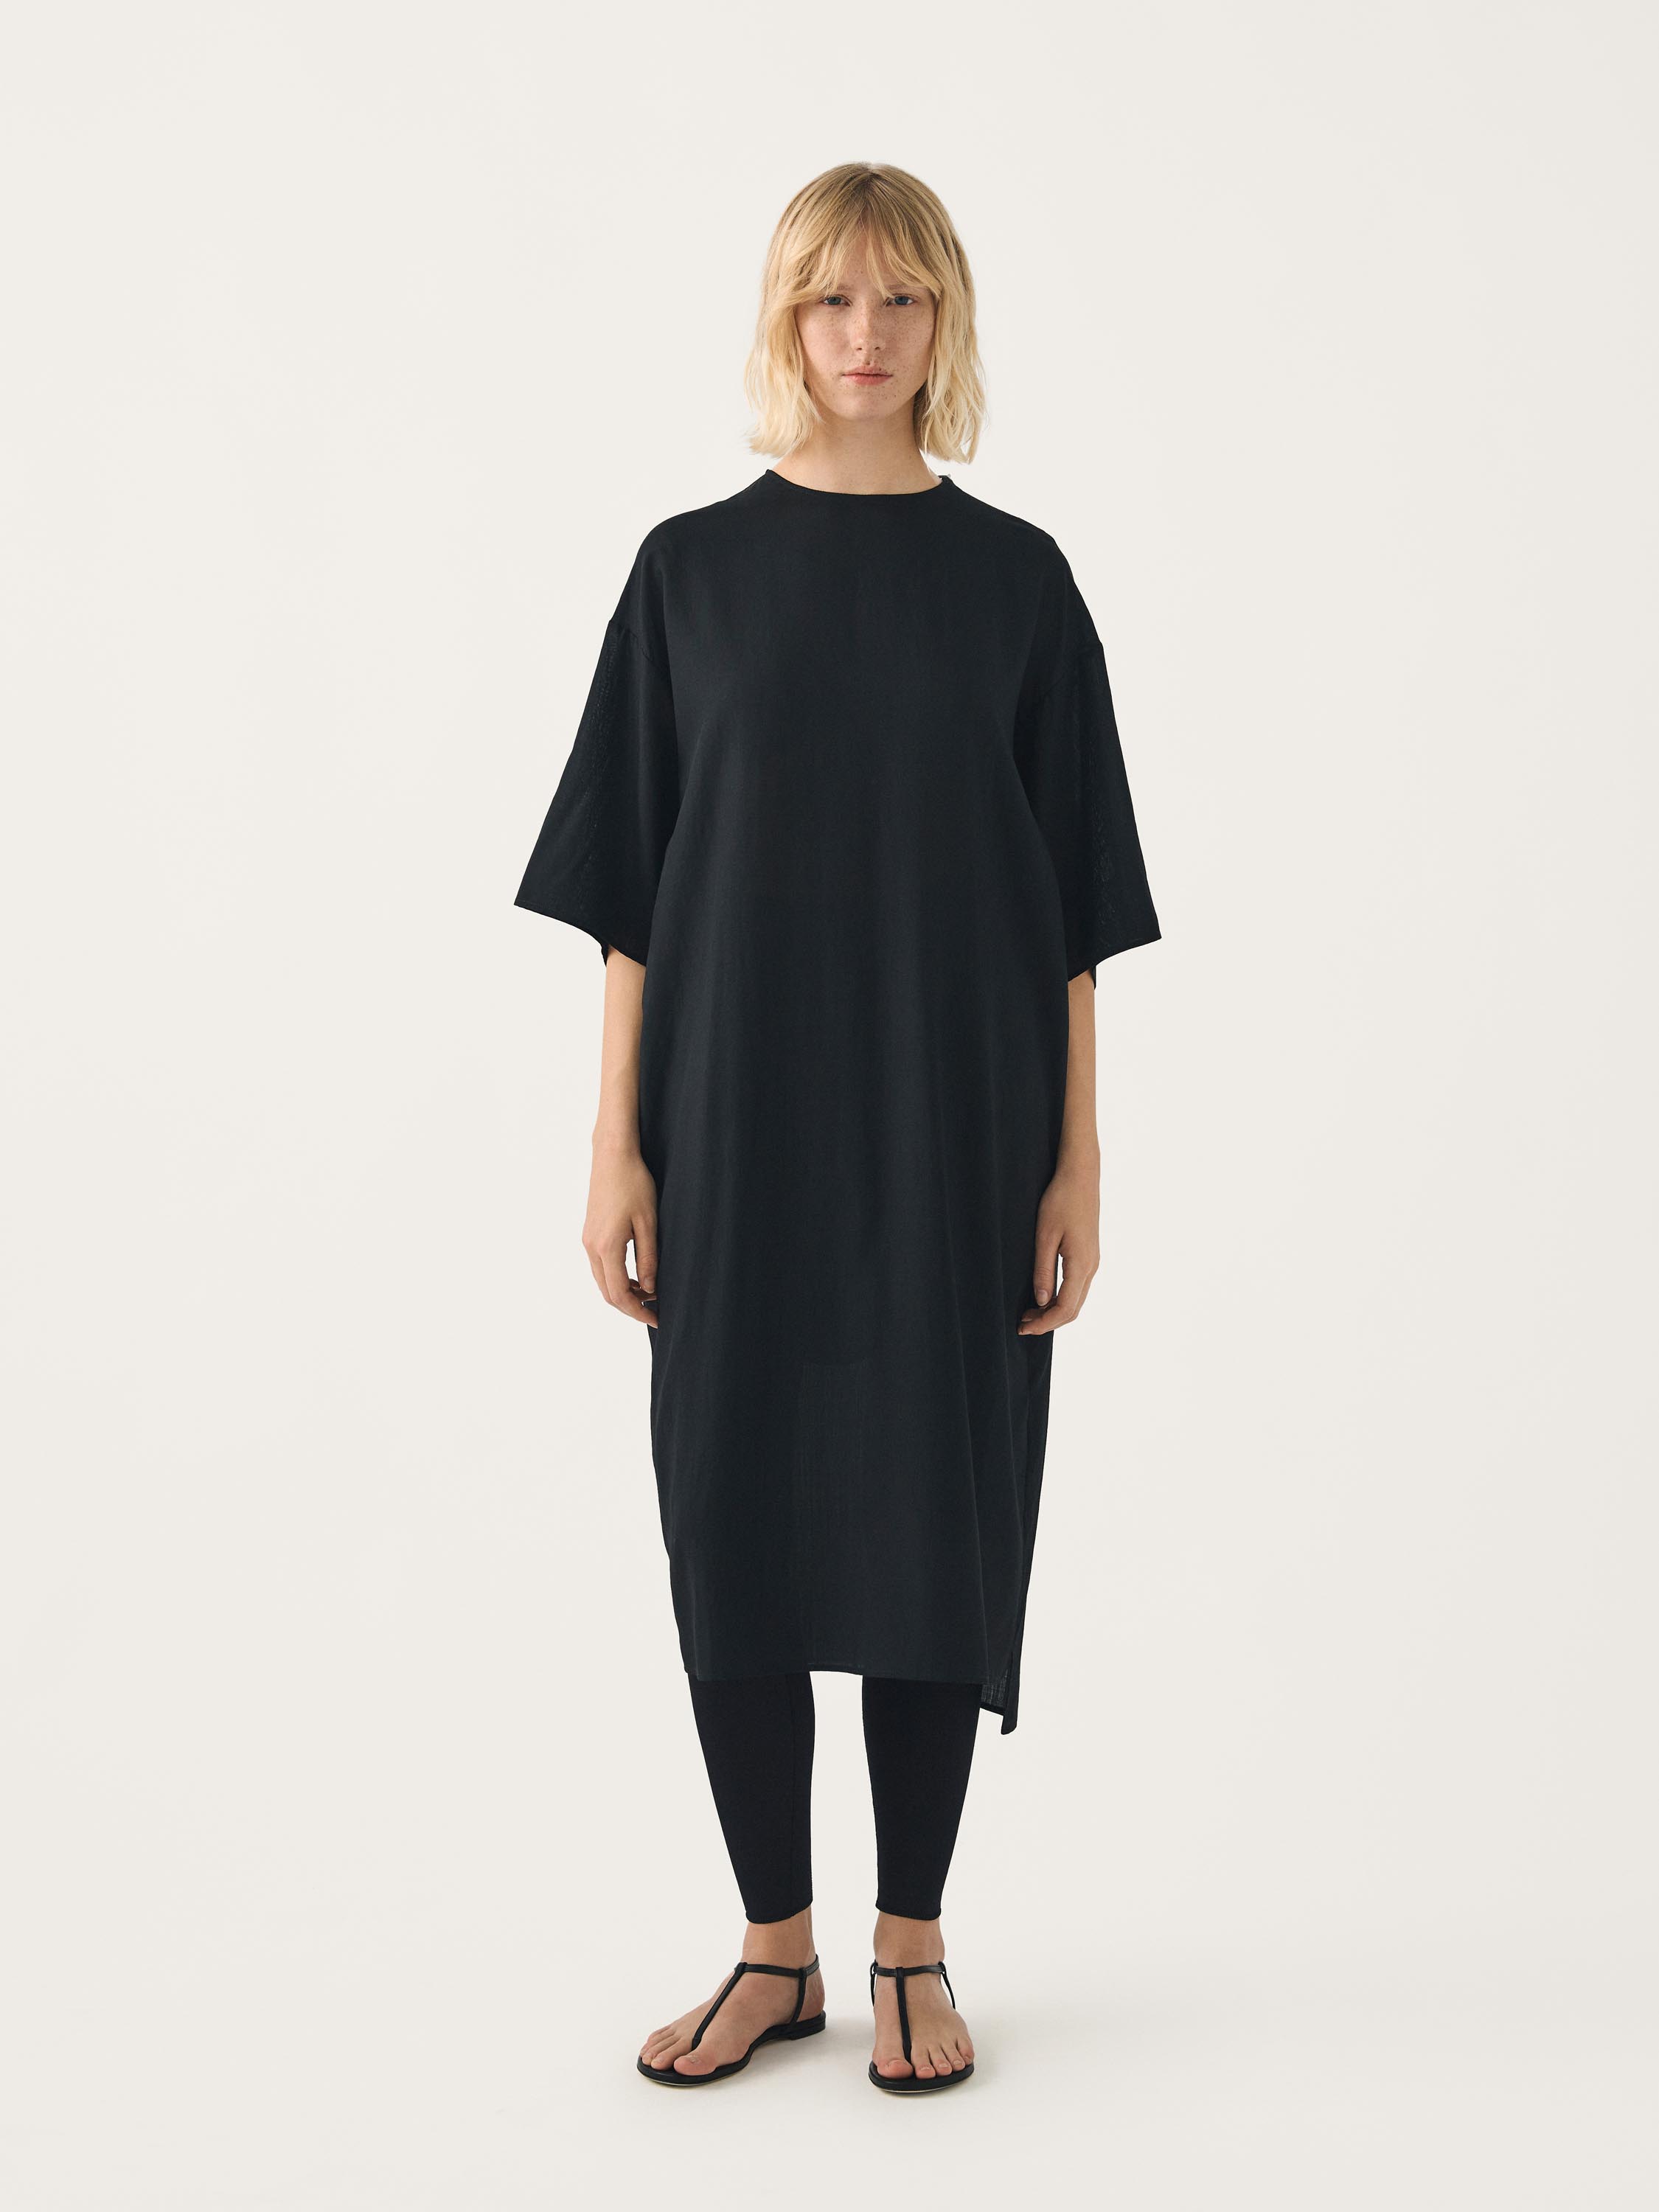 elbow-length t-shirt dress | FFORME KEON sleeves with woven